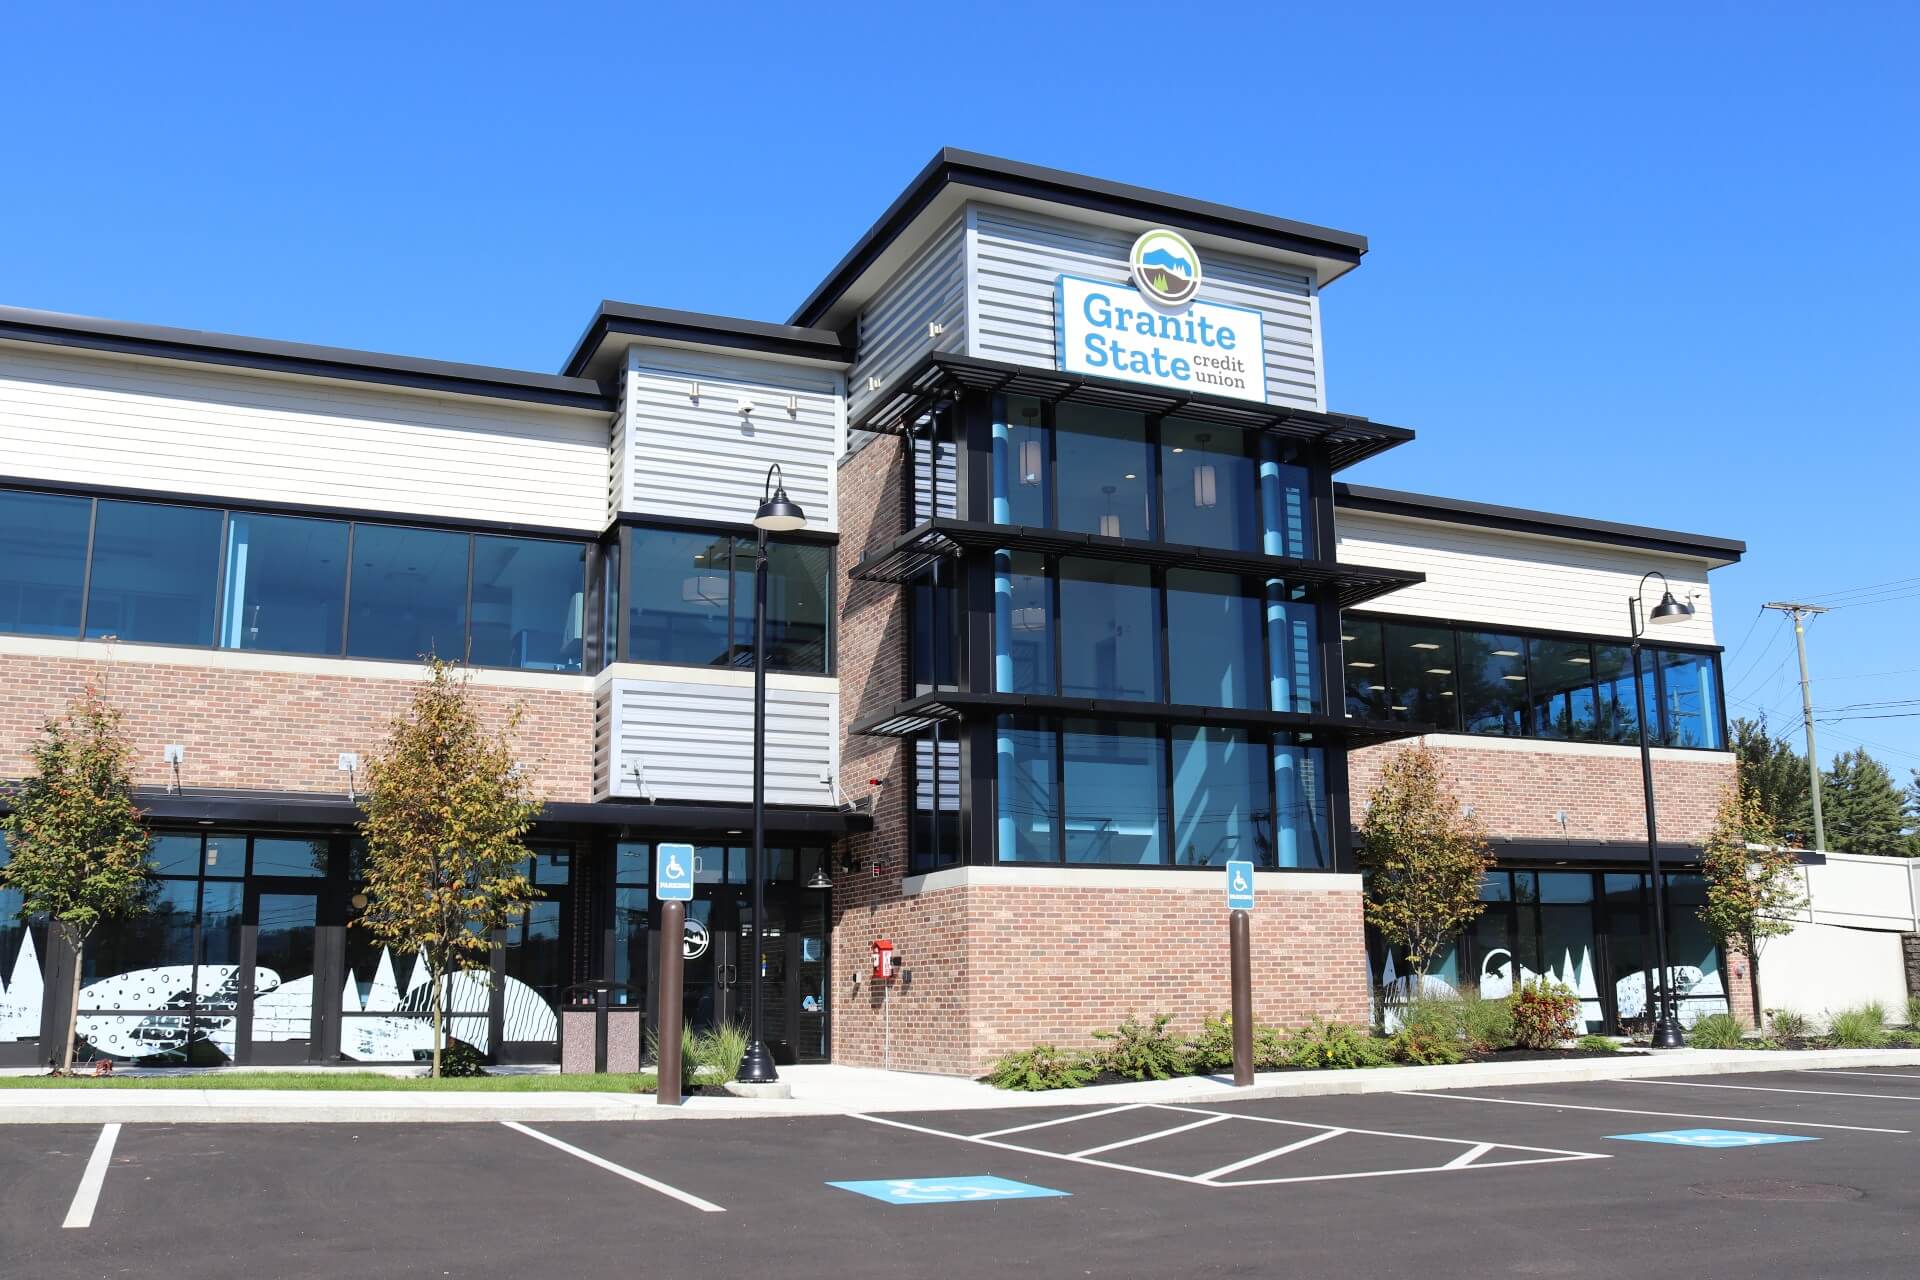 Image of a multi-story Granite State Credit Union.